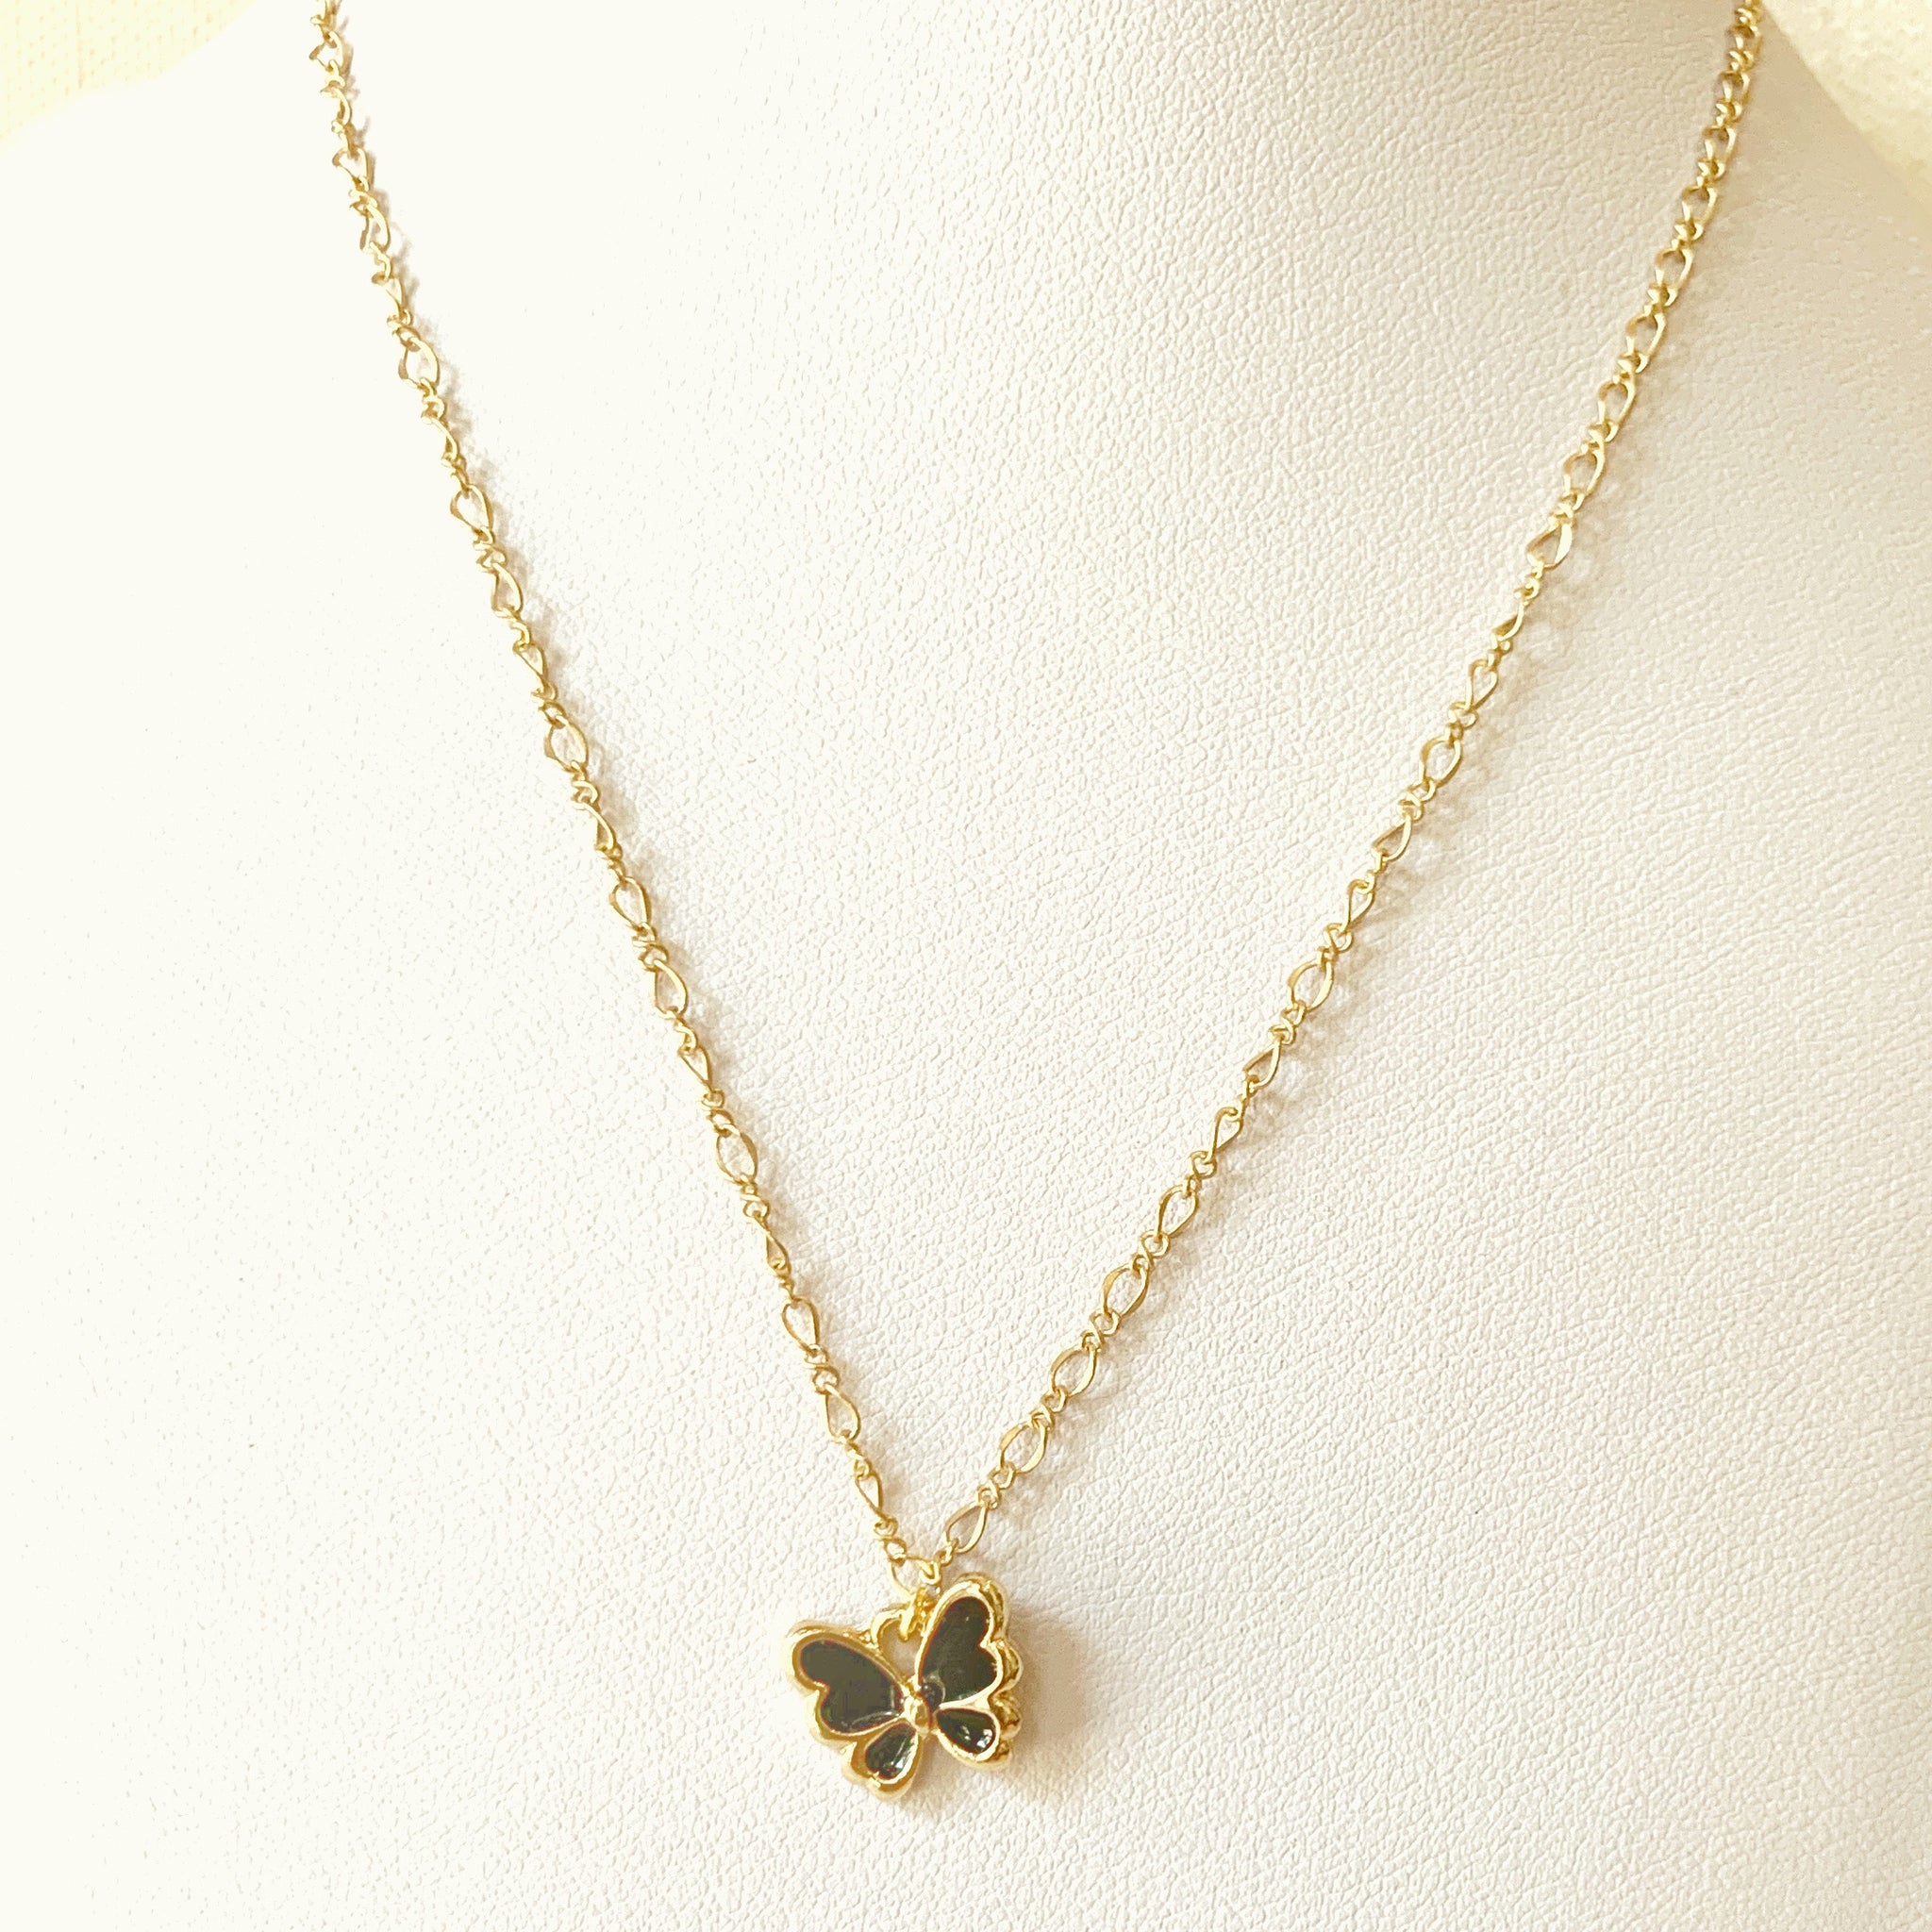 “Lizzy” Small Black Butterfly Charm Necklace